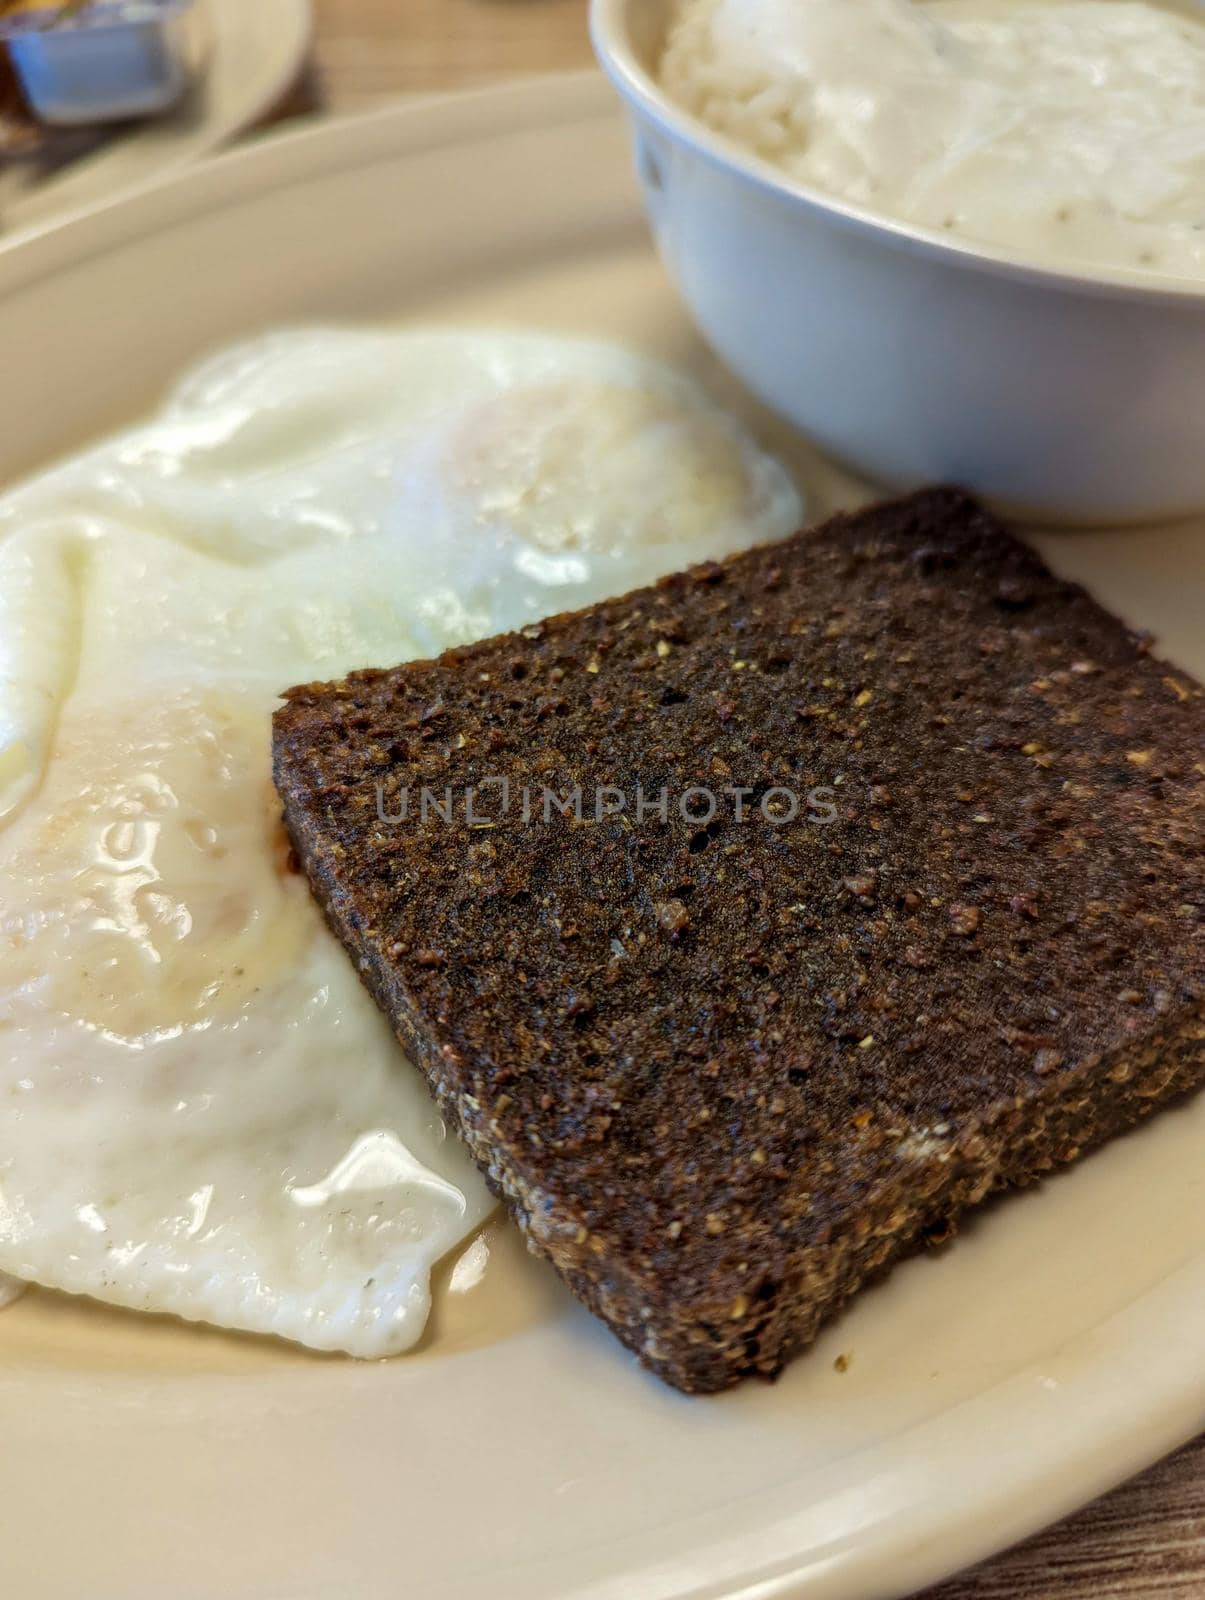 morning livermush breakfast with eggs and gravy by digidreamgrafix